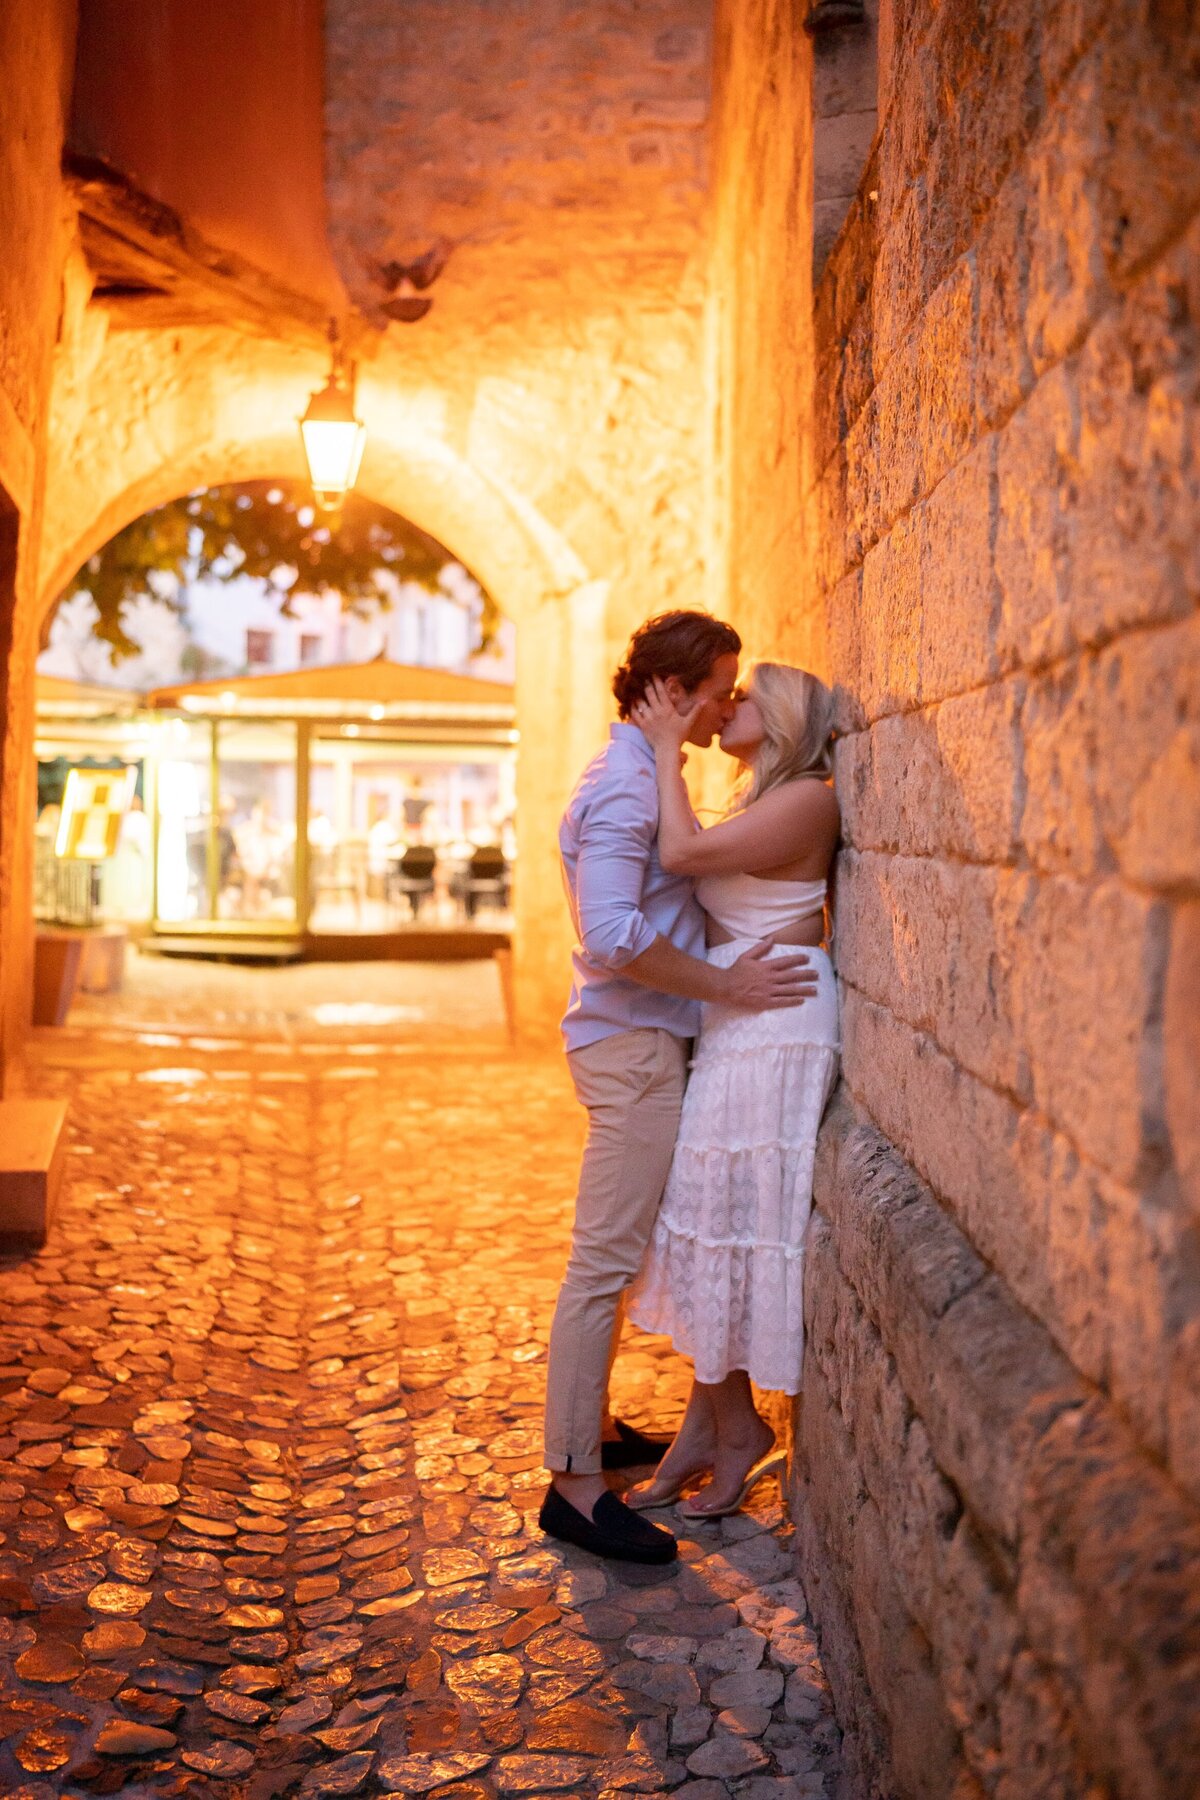 South of France wedding photographer